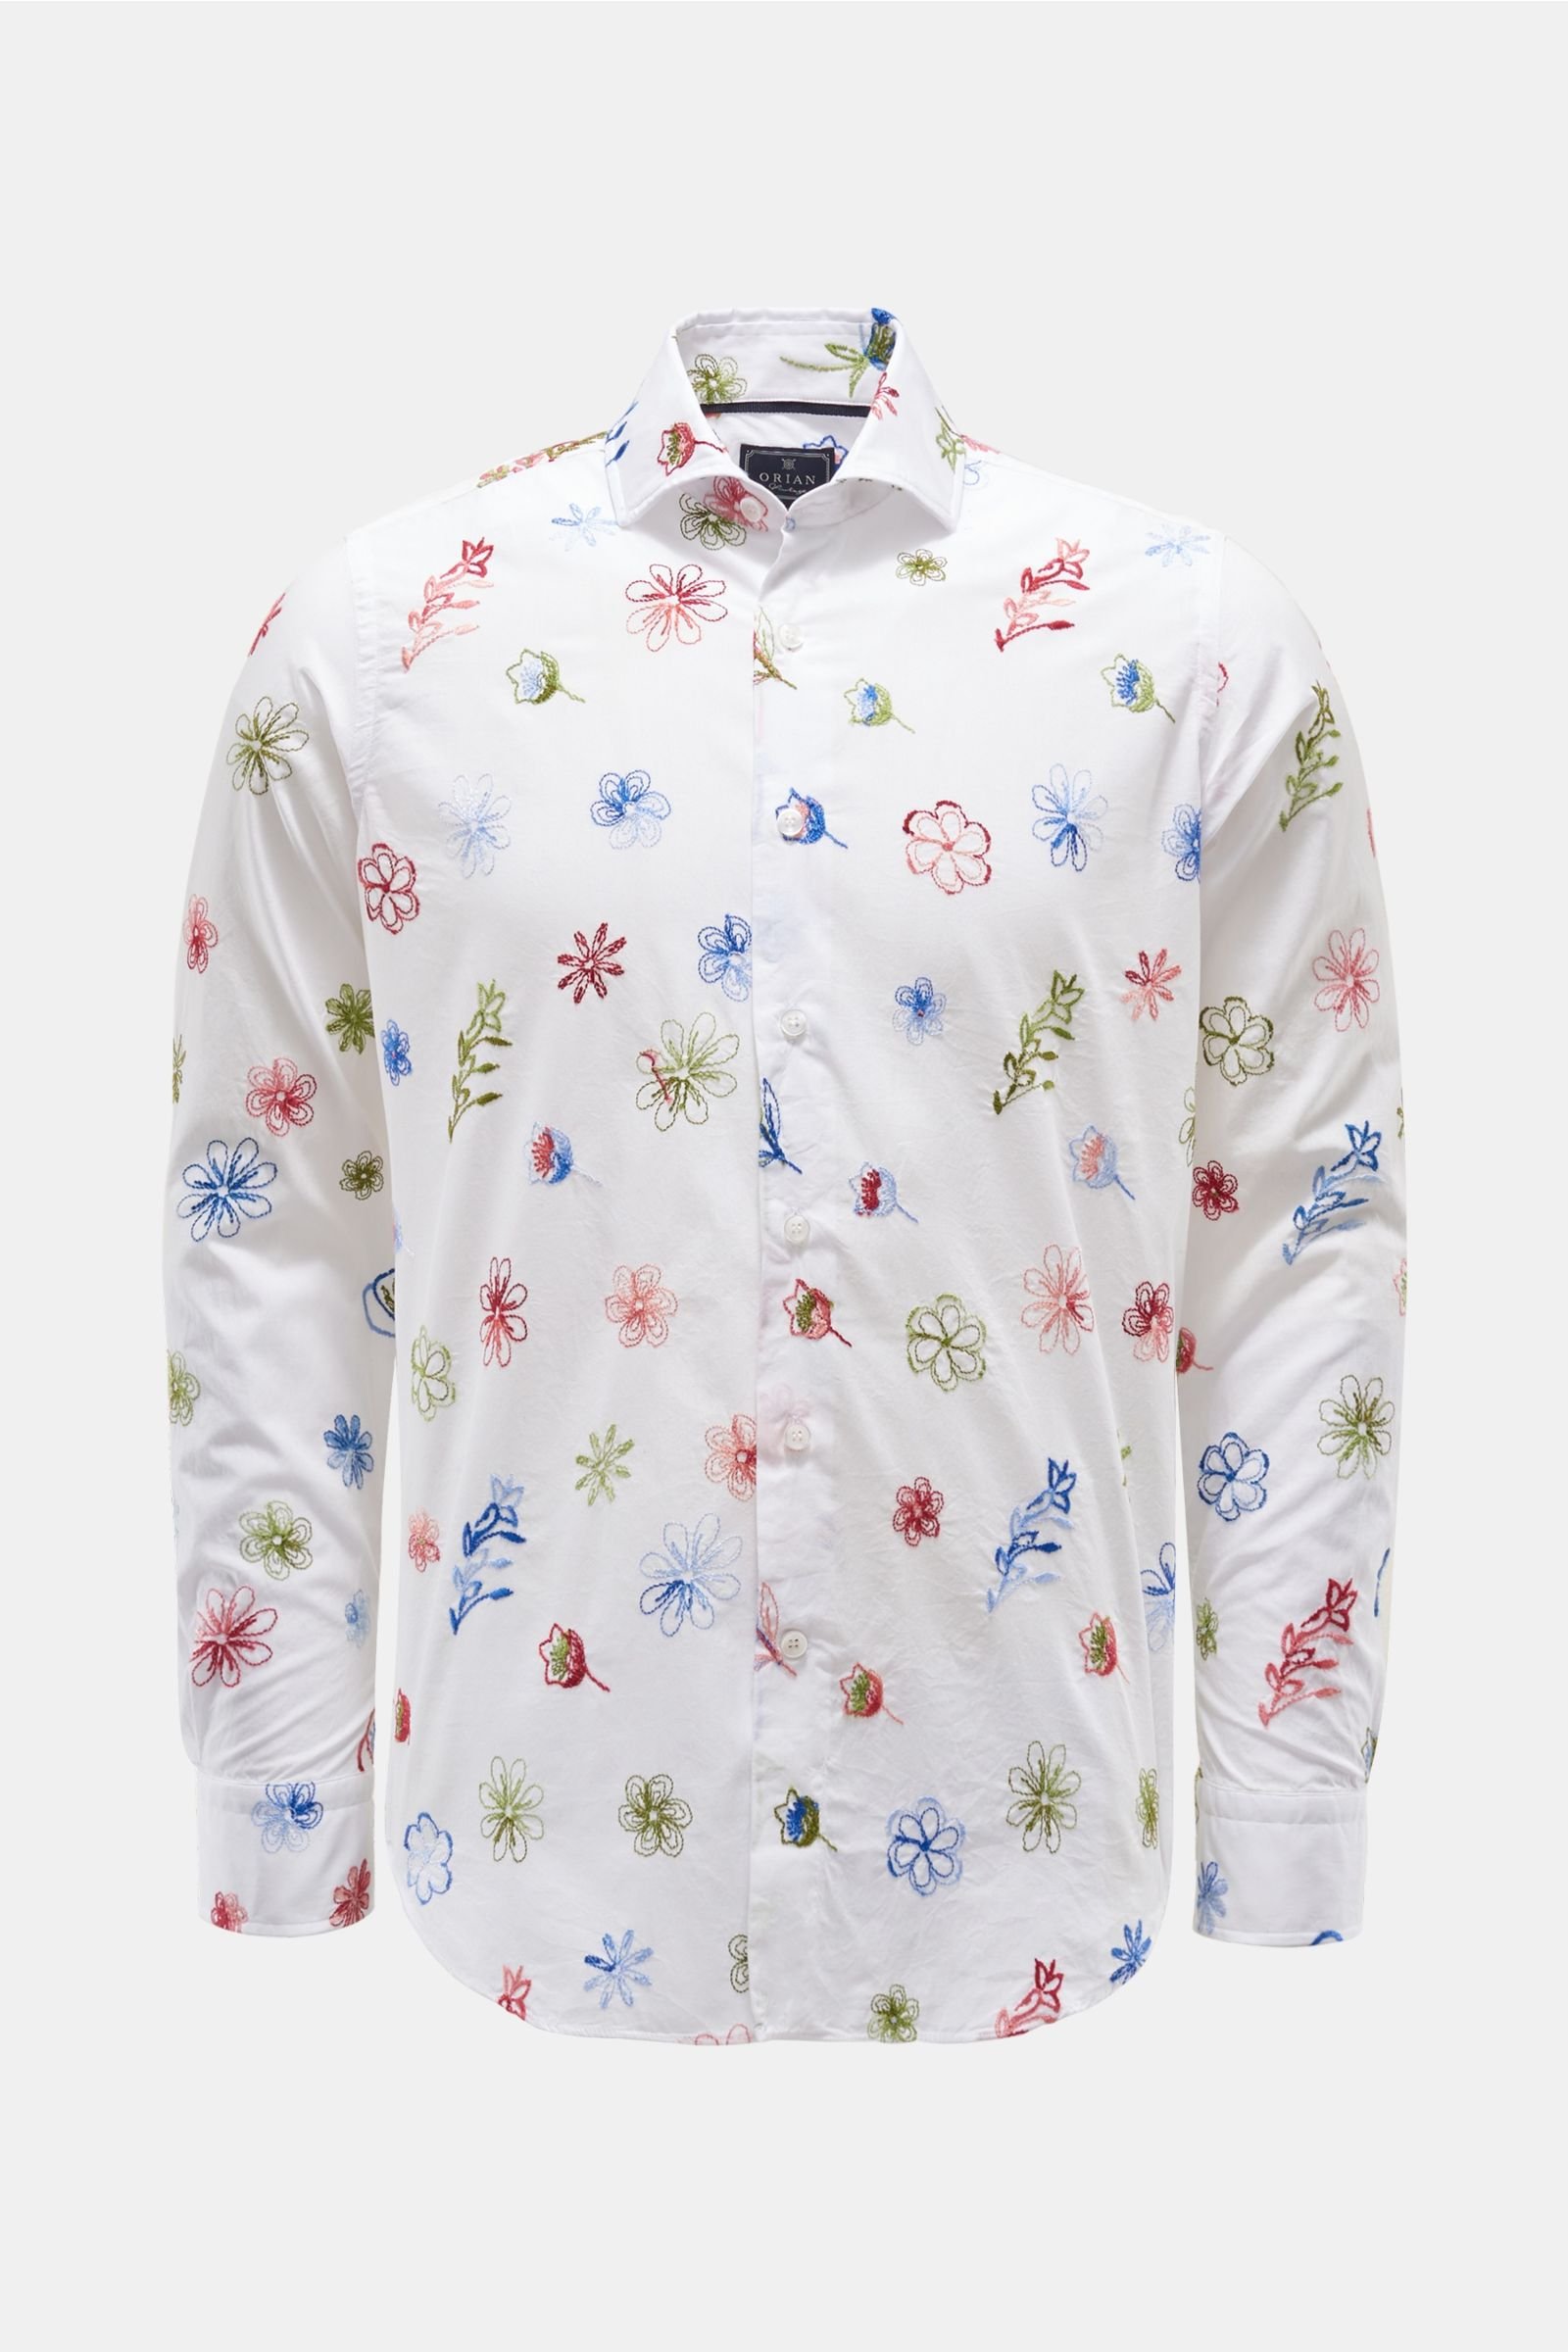 Casual shirt shark collar white patterned